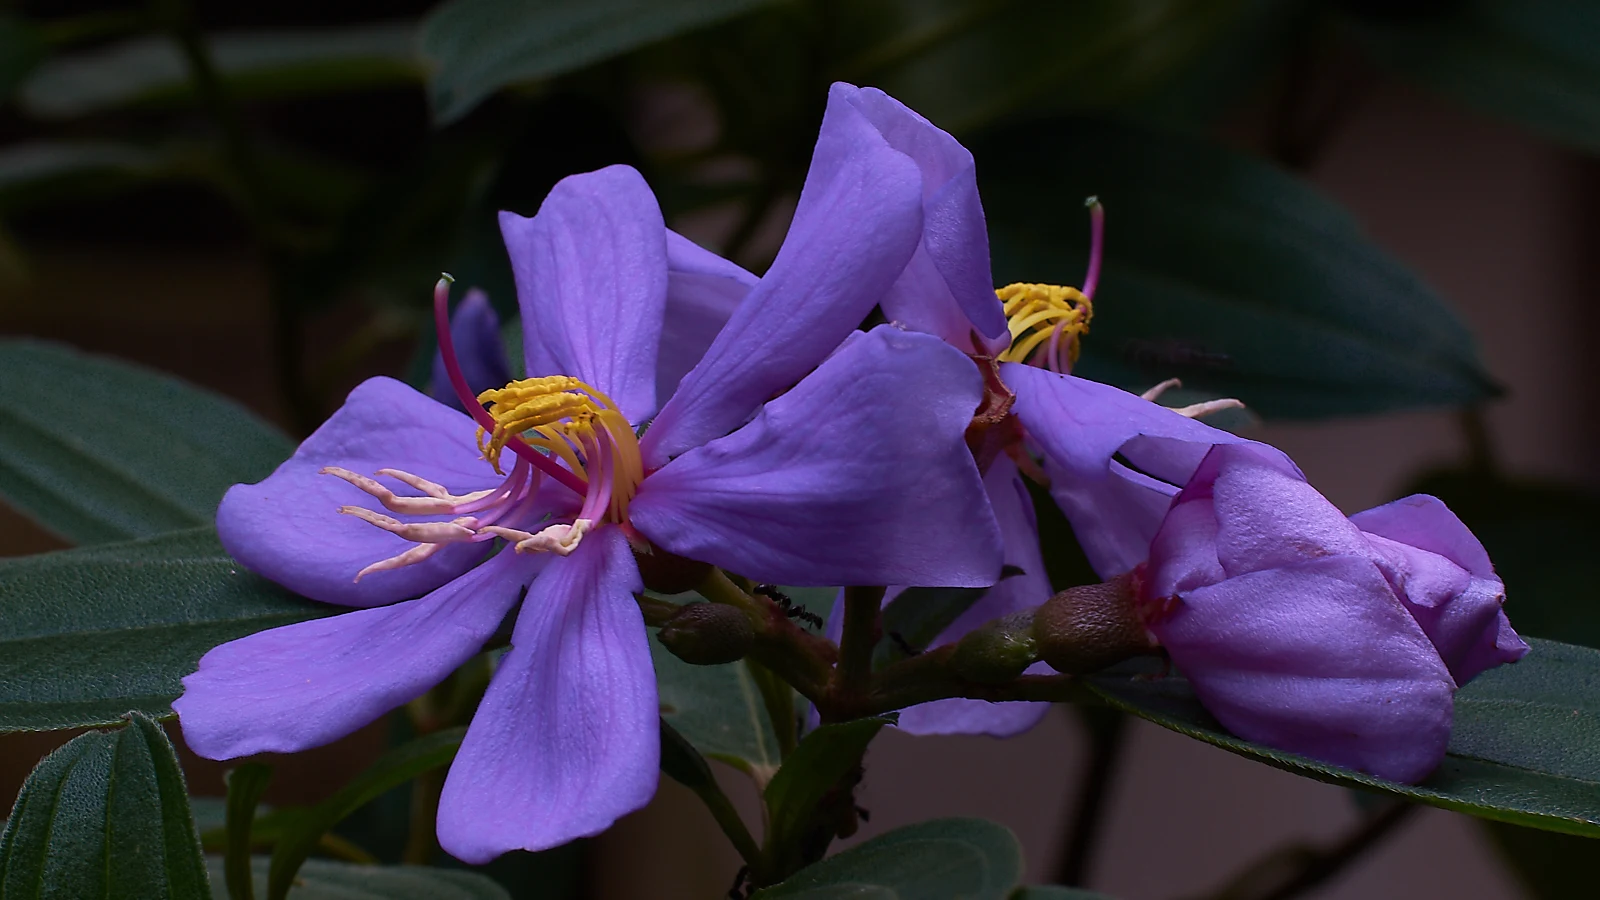 Purple / mauve blossoms, Yellow and purple stamens and pistils, lush green leaves. What's not to like?